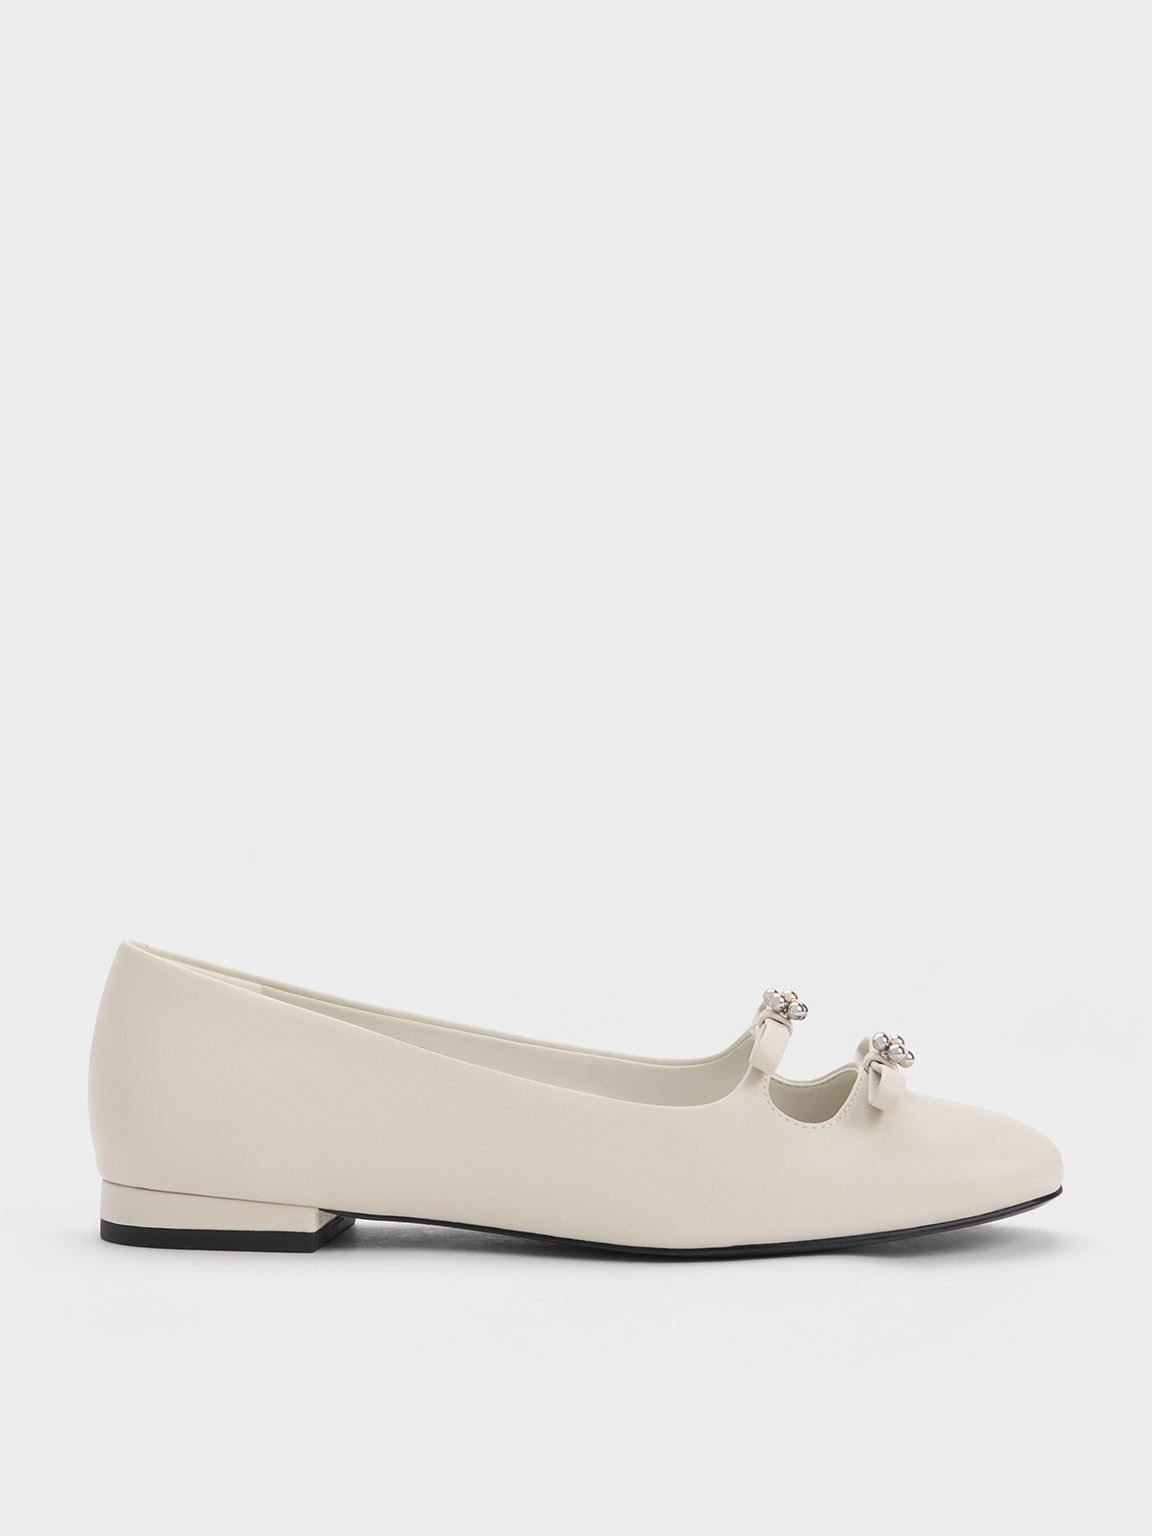 Charles & Keith Floral Beaded Bow Ballerinas In Chalk